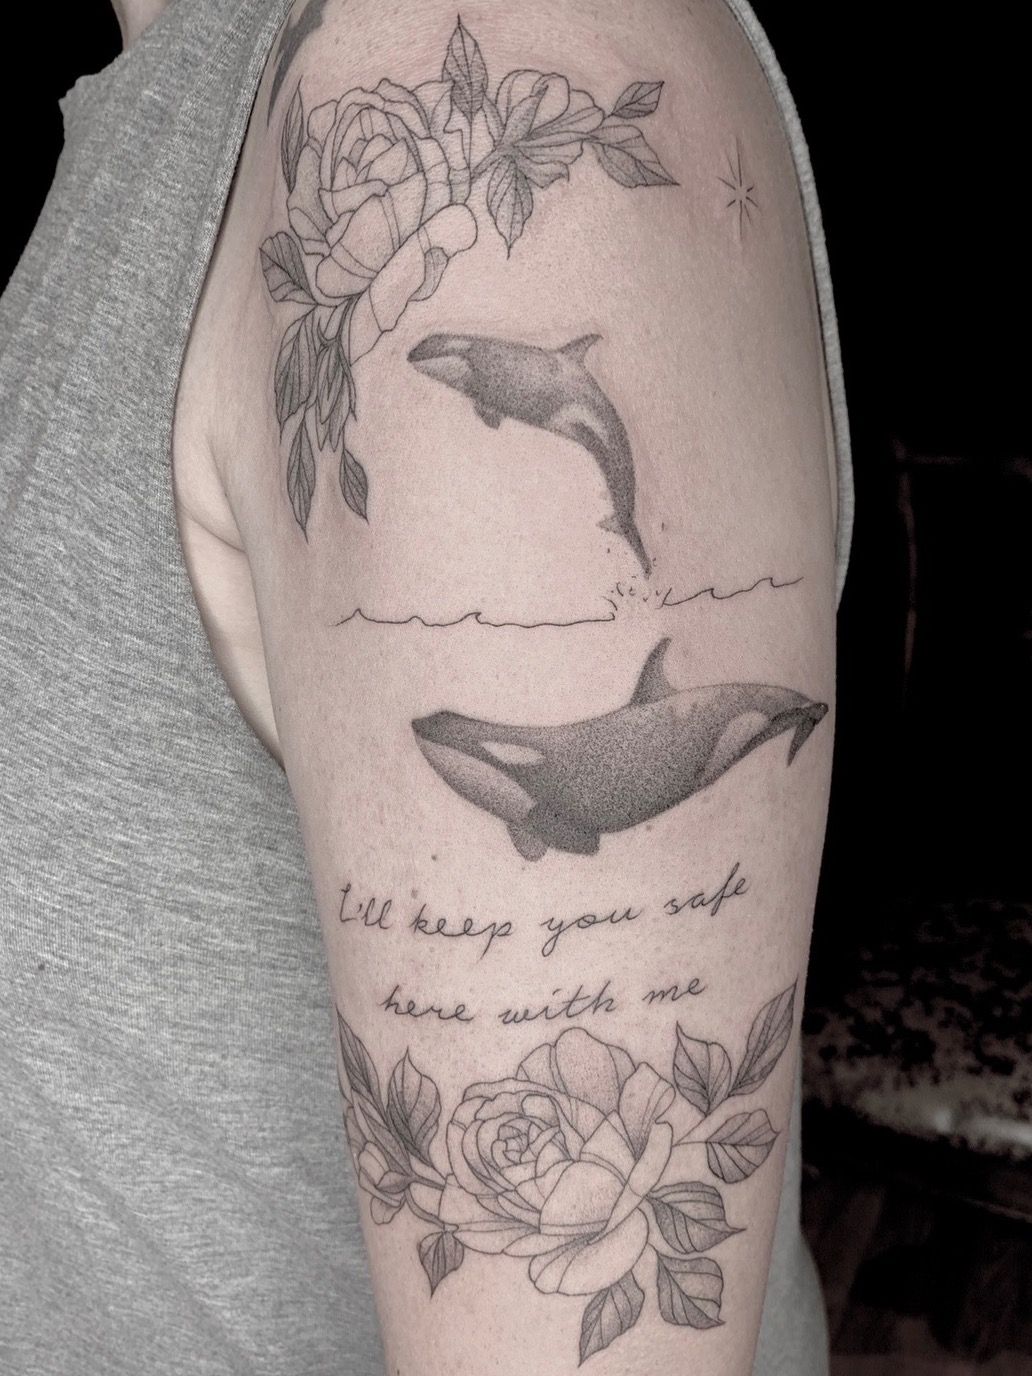 10 Best Dolphin Tattoo Ideas Youll Have To See To Believe 